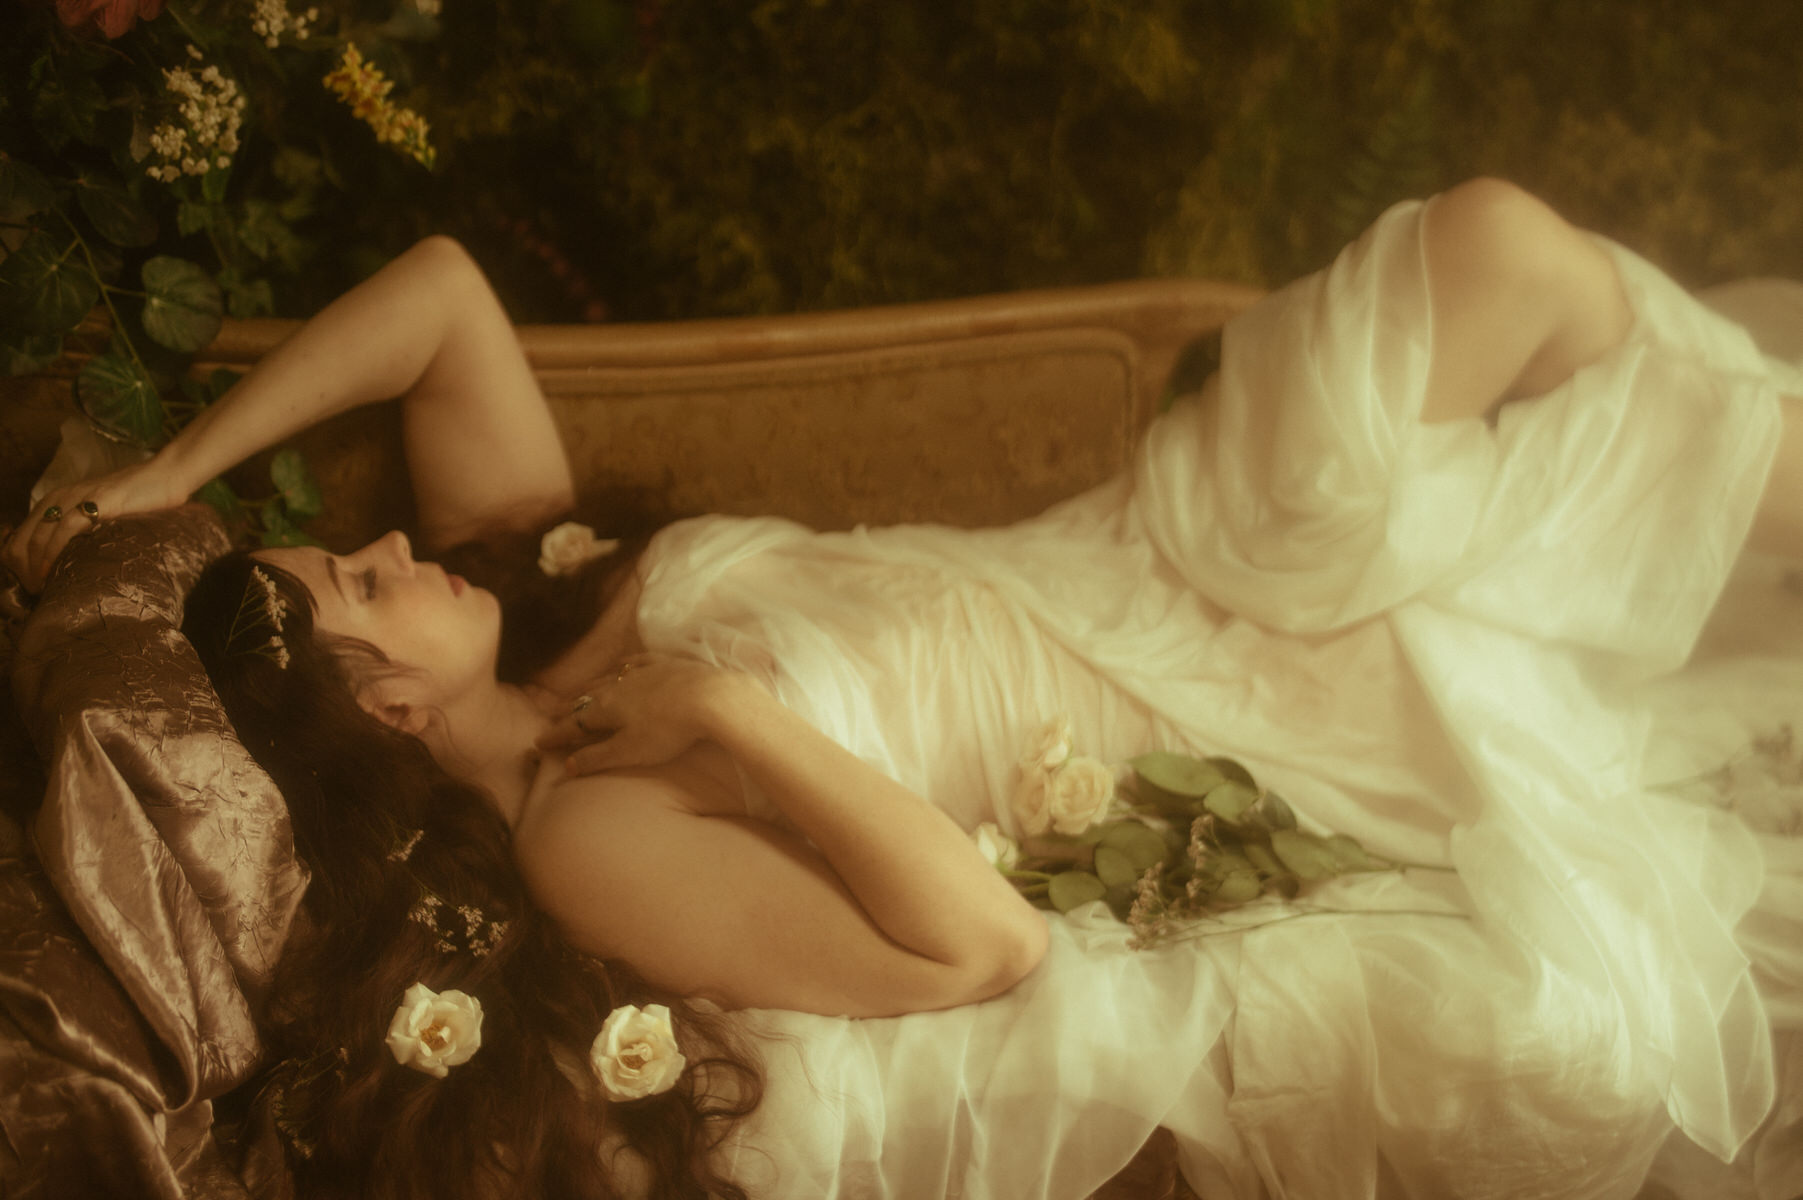 A dreamy woman in a white dress lounges on a couch in a boudoir setting.